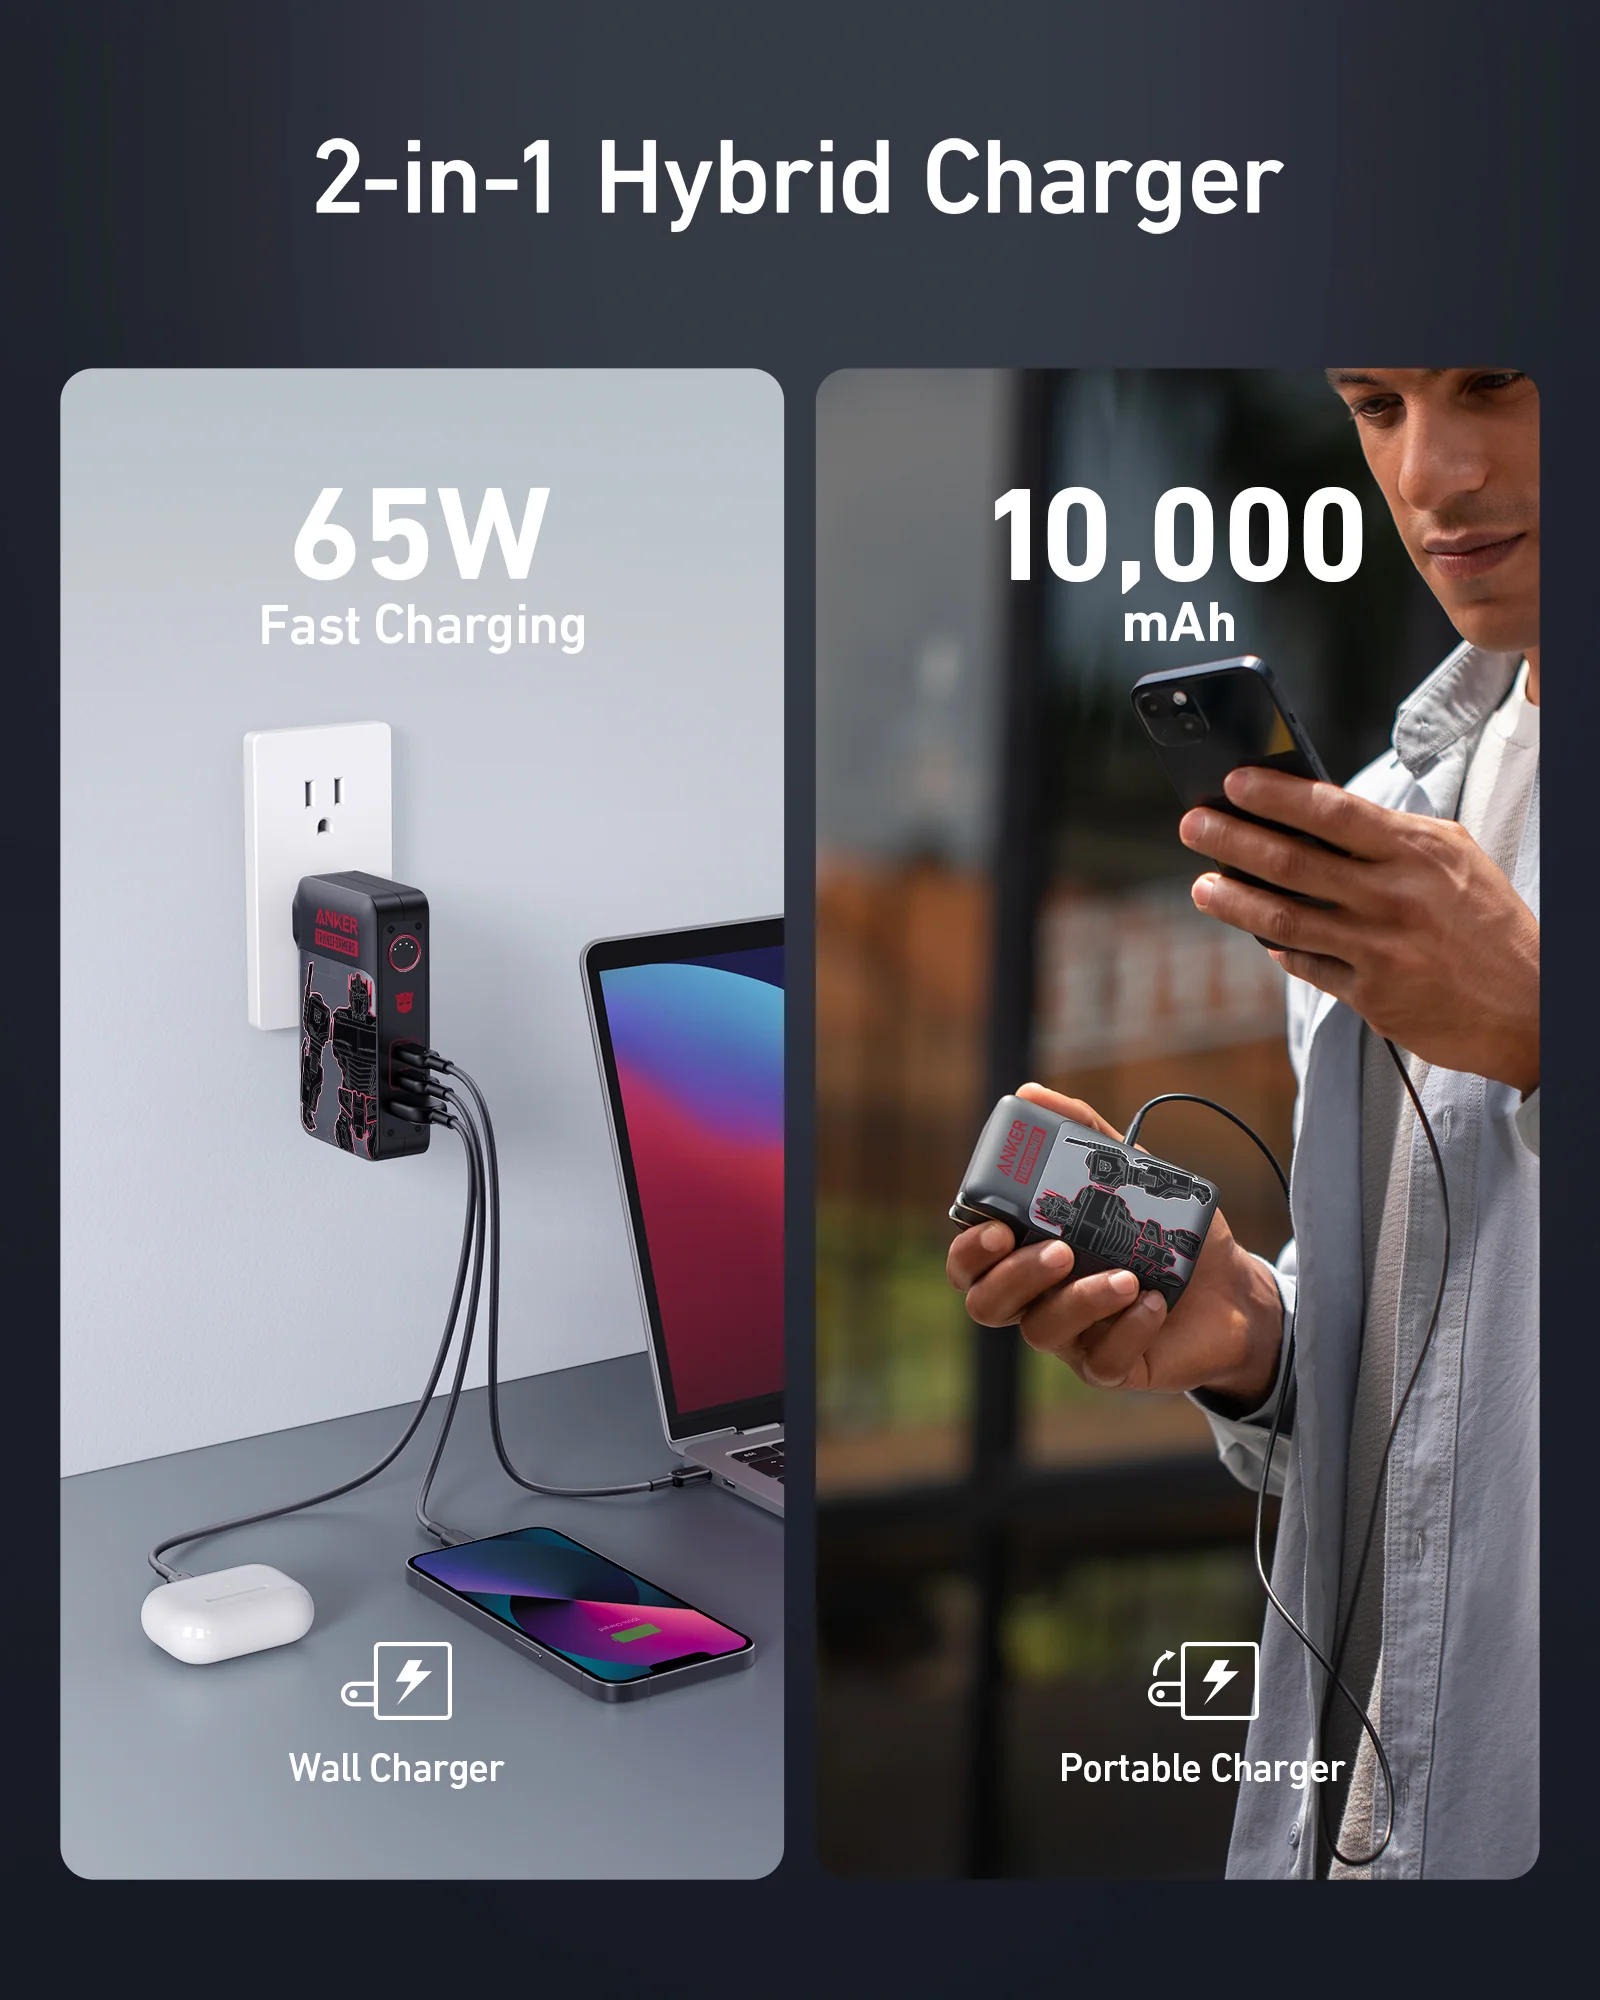 Anker Nano II series GaN chargers launch with up to 65W charging